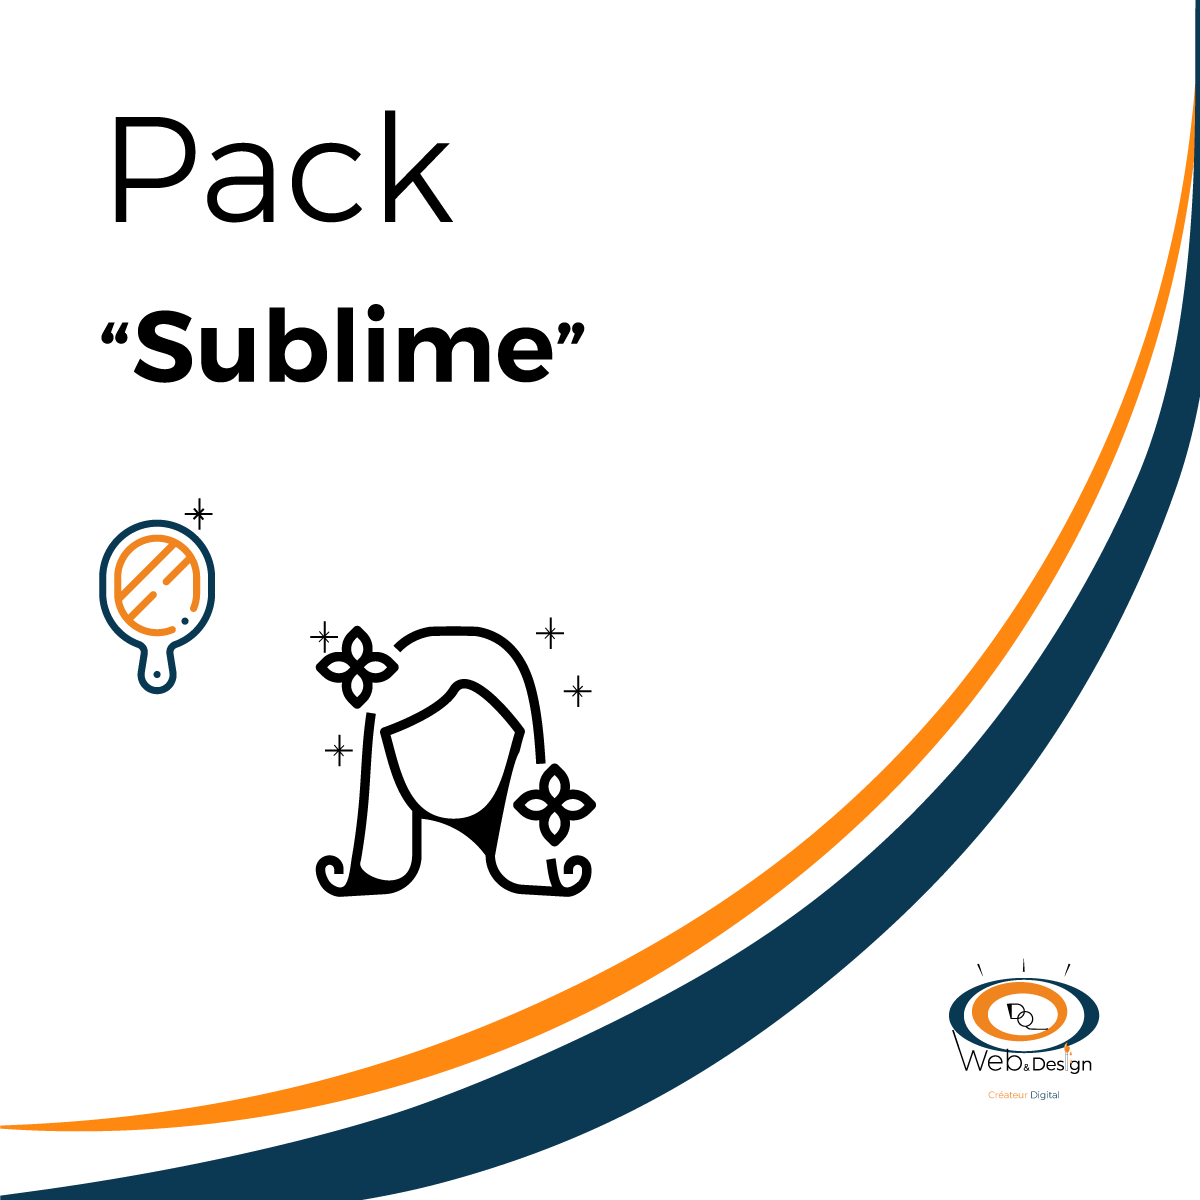 Pack "Sublime"